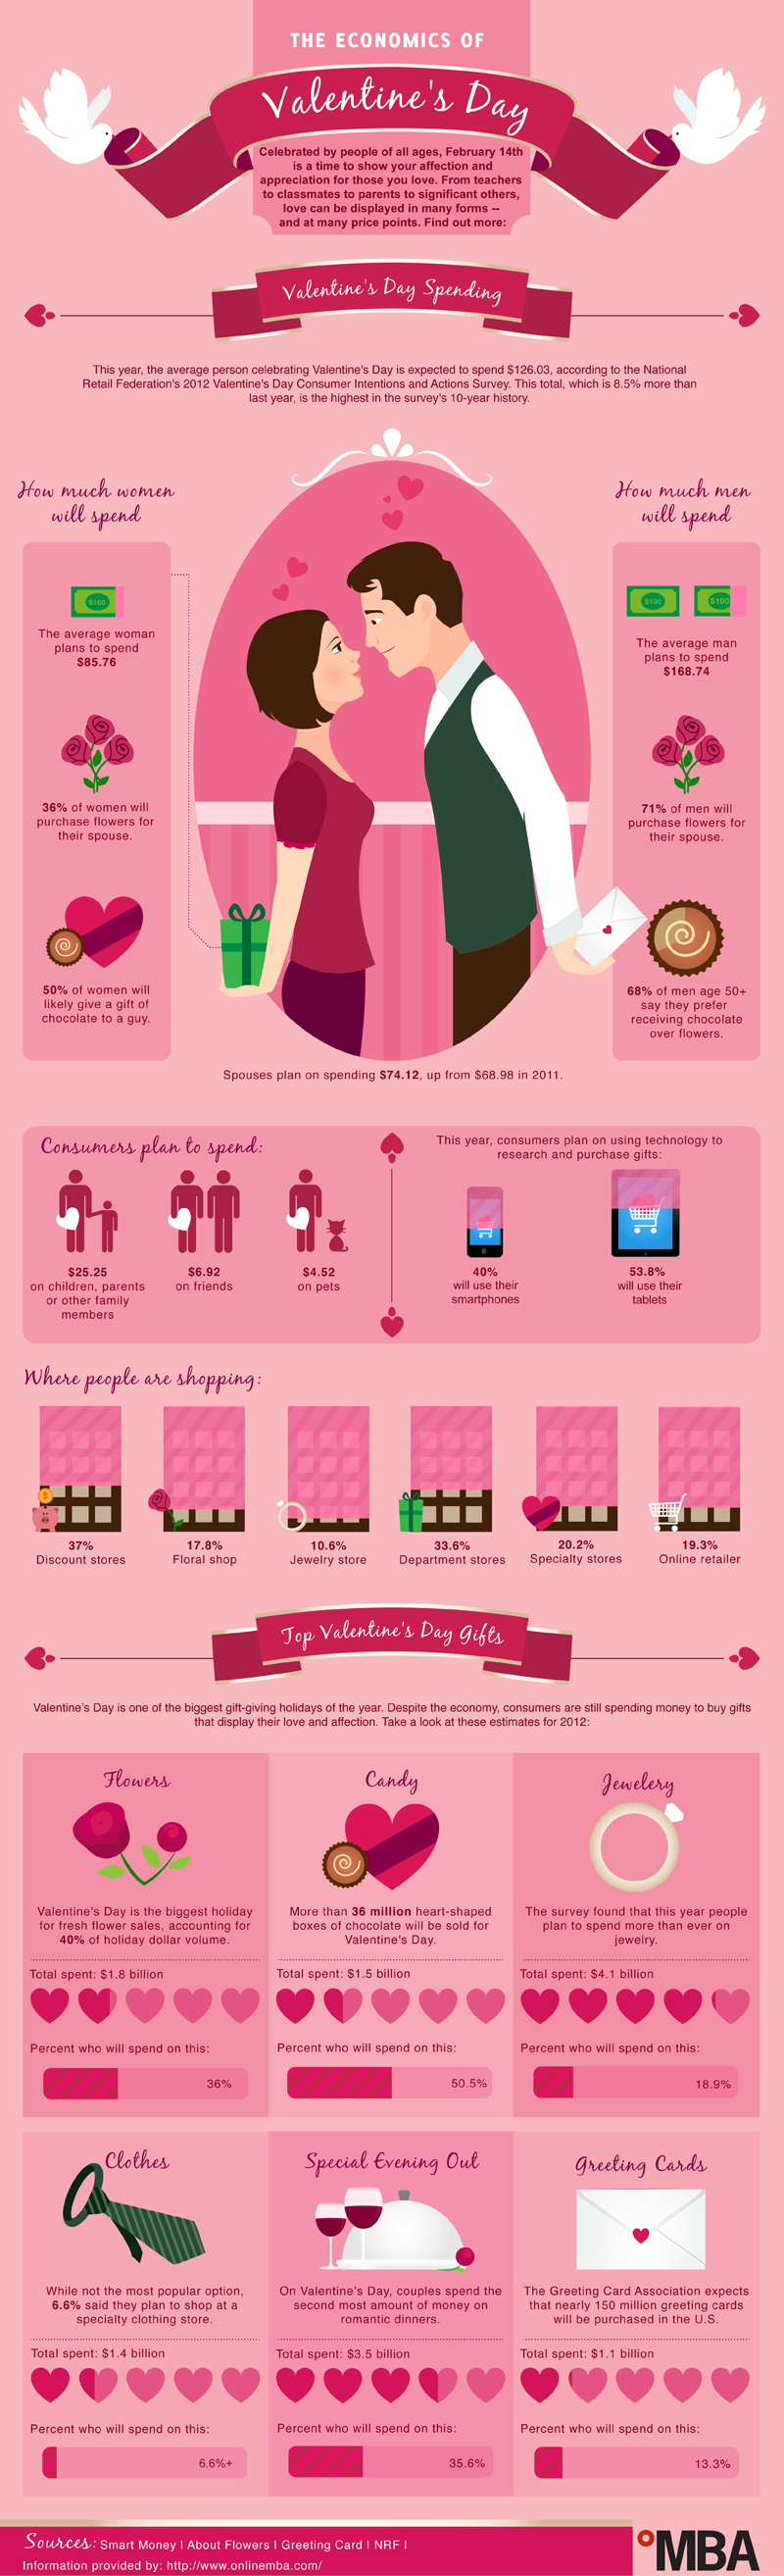 Valentines Day Trends and Statistics